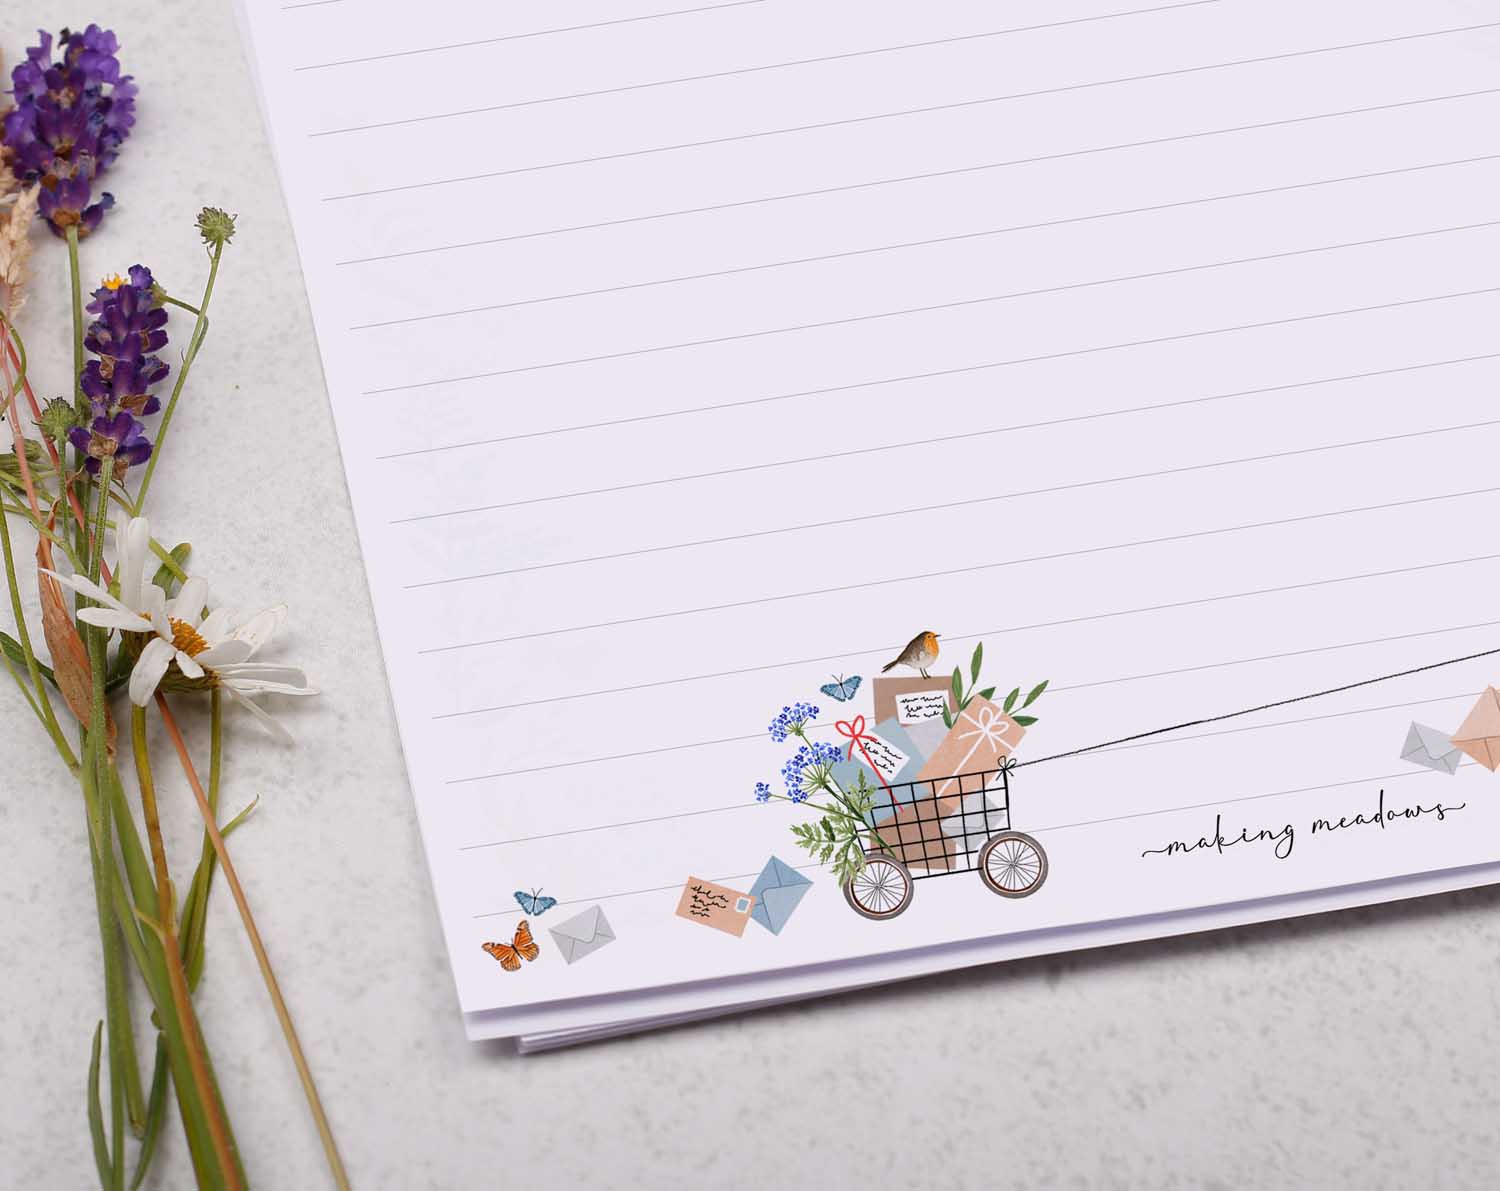 A4 letter writing paper sheets with an illustration of a fox on a bike.